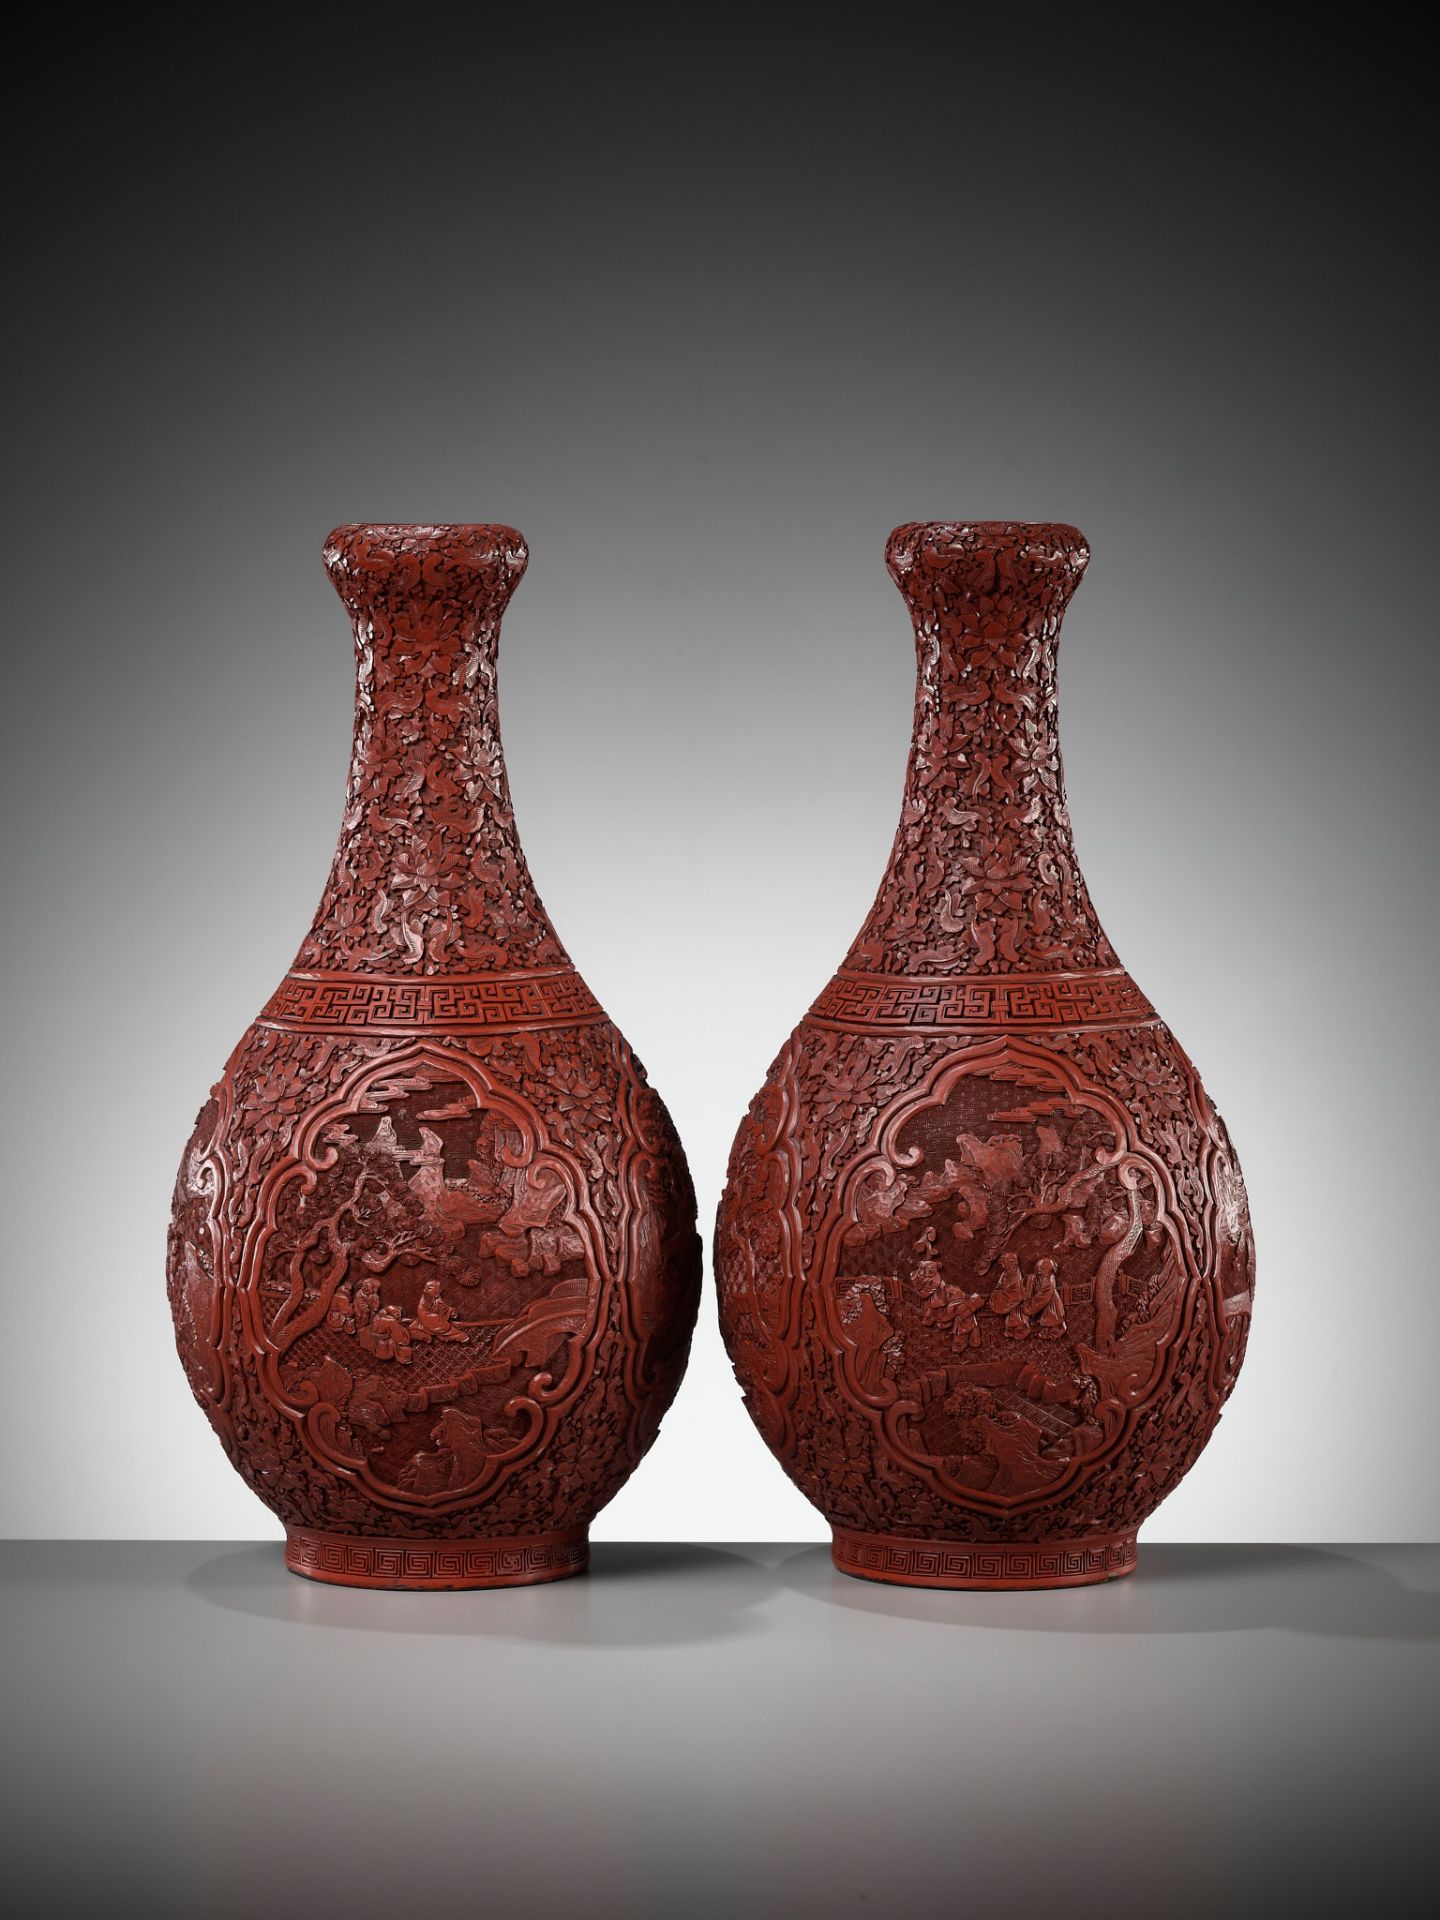 A PAIR OF LARGE CINNABAR LACQUER GARLIC HEAD VASES, CHINA, 1800-1850 - Image 11 of 14